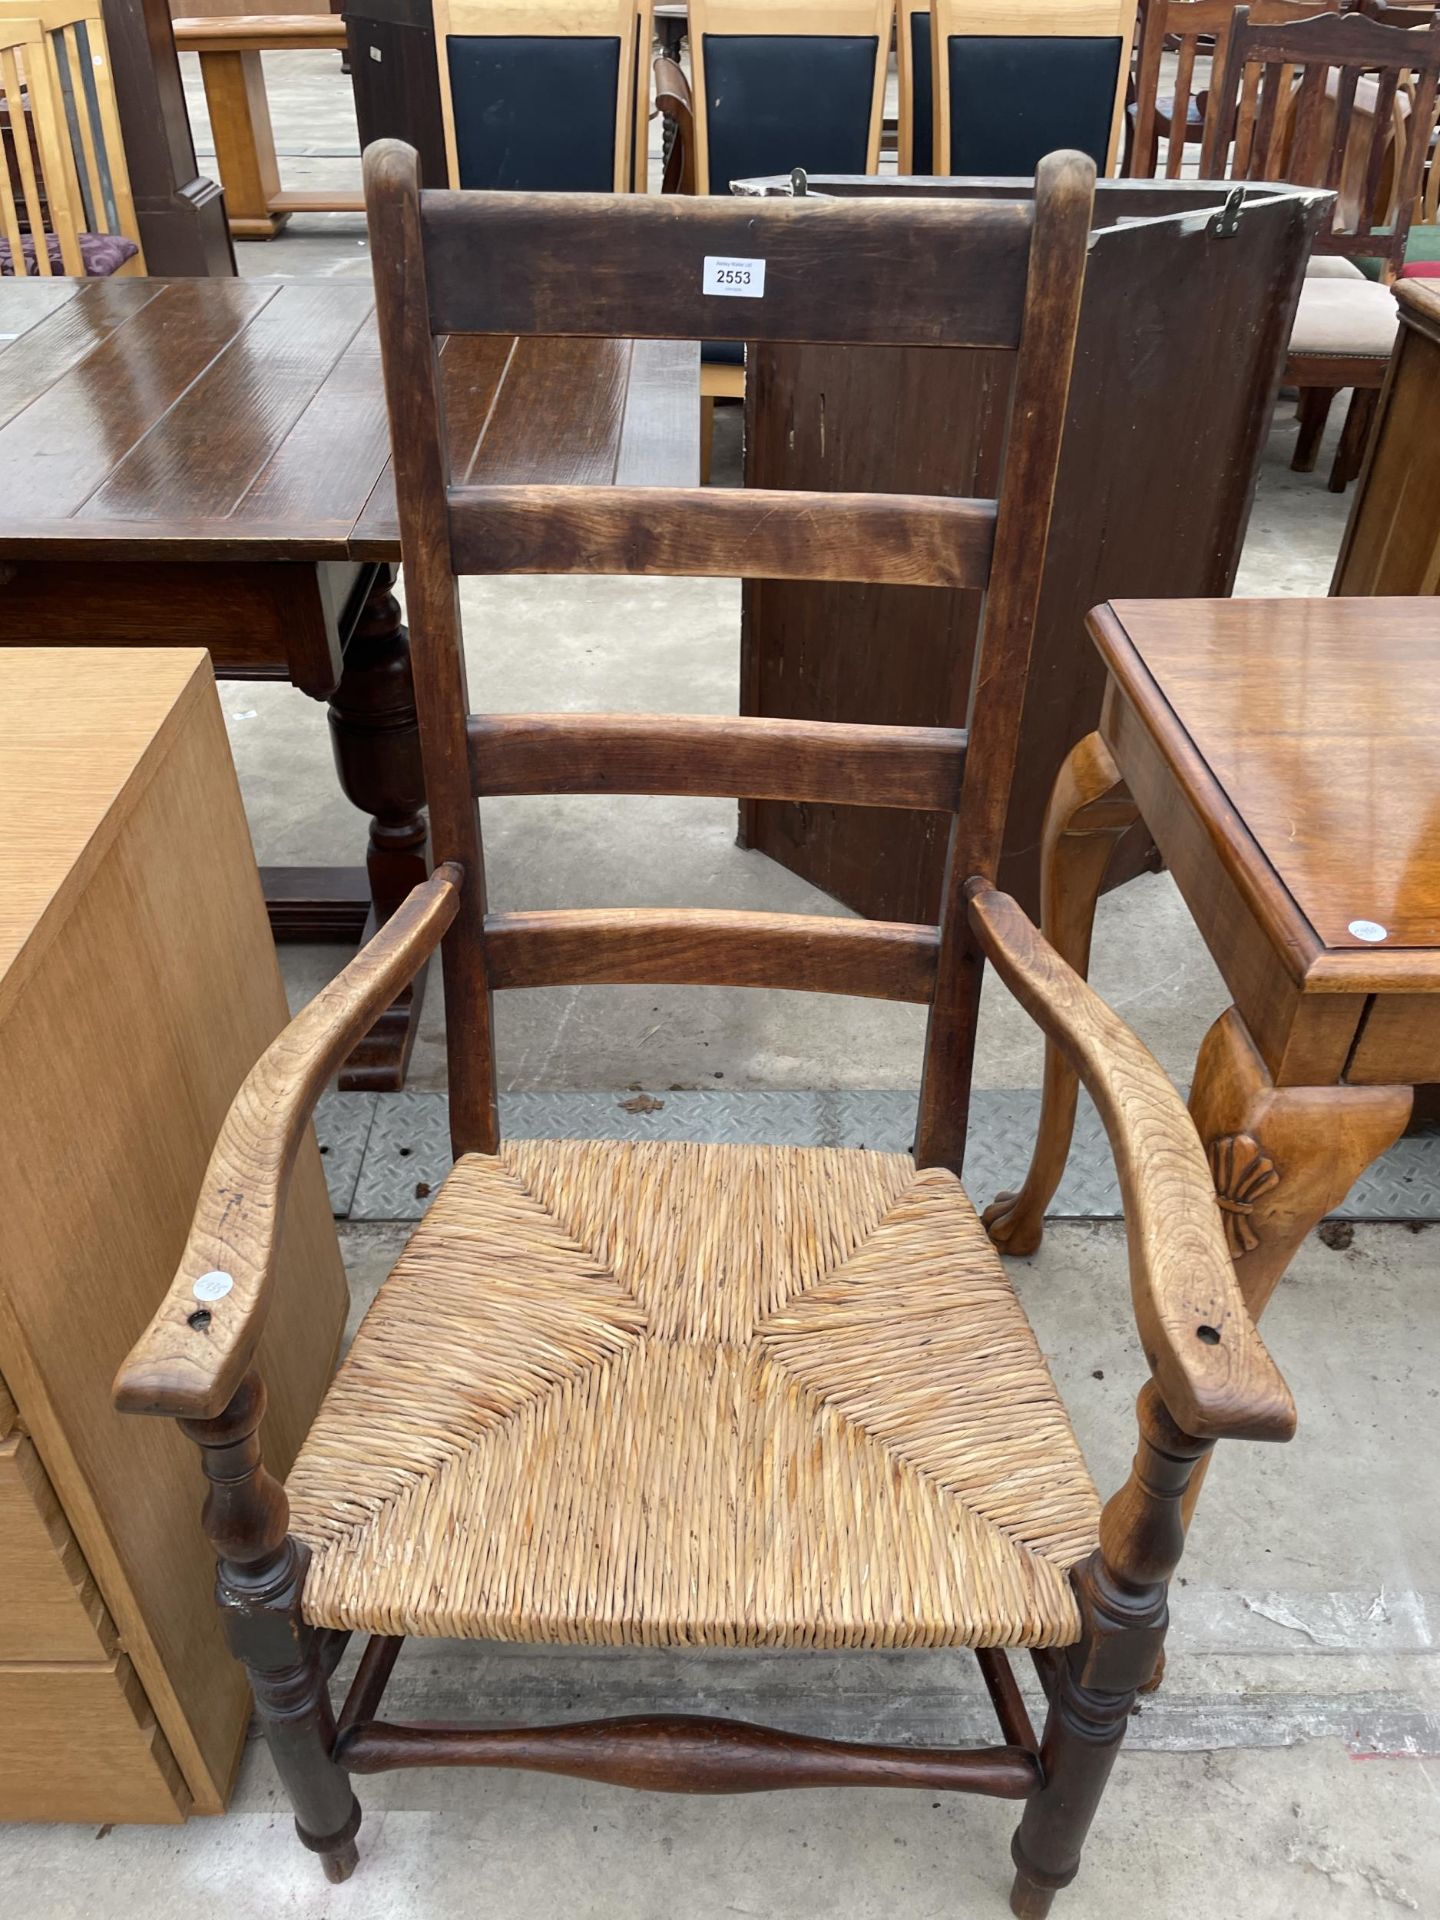 A 19TH CENTURY LADDERBACK ELBOW CHAIR WITH RUSH SEAT